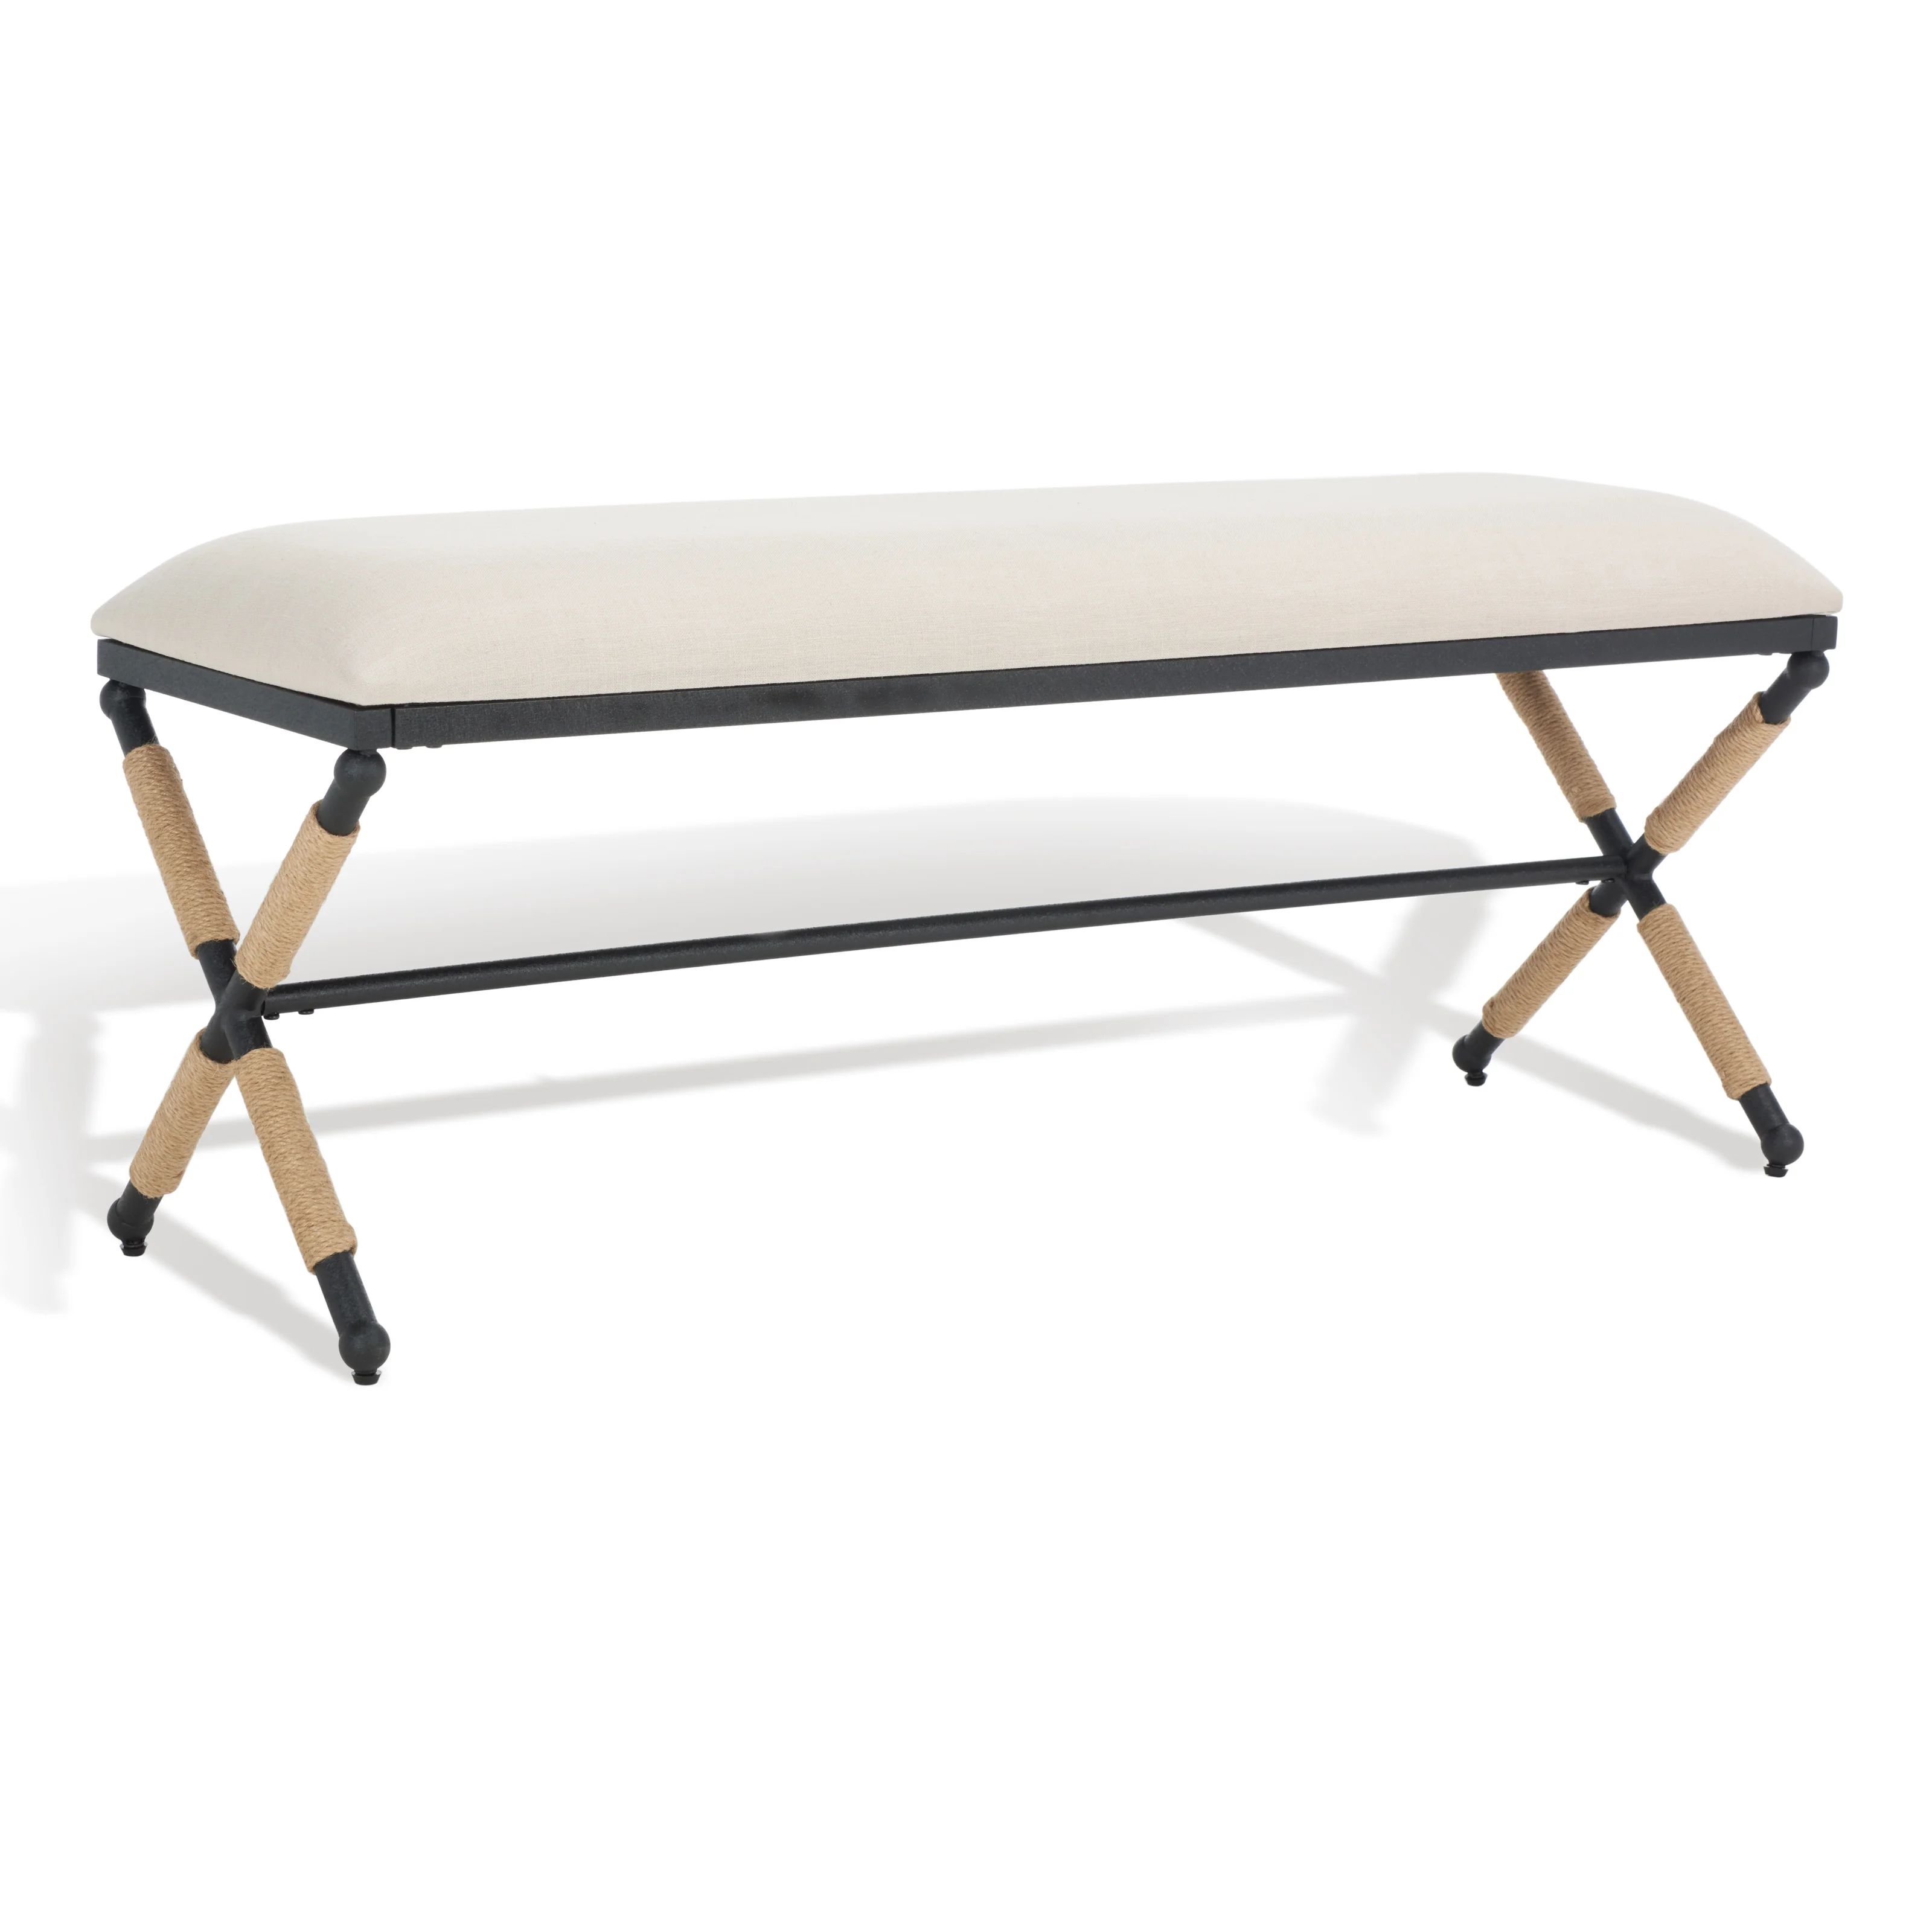 Lowdes Upholstered Bench | Wayfair Professional